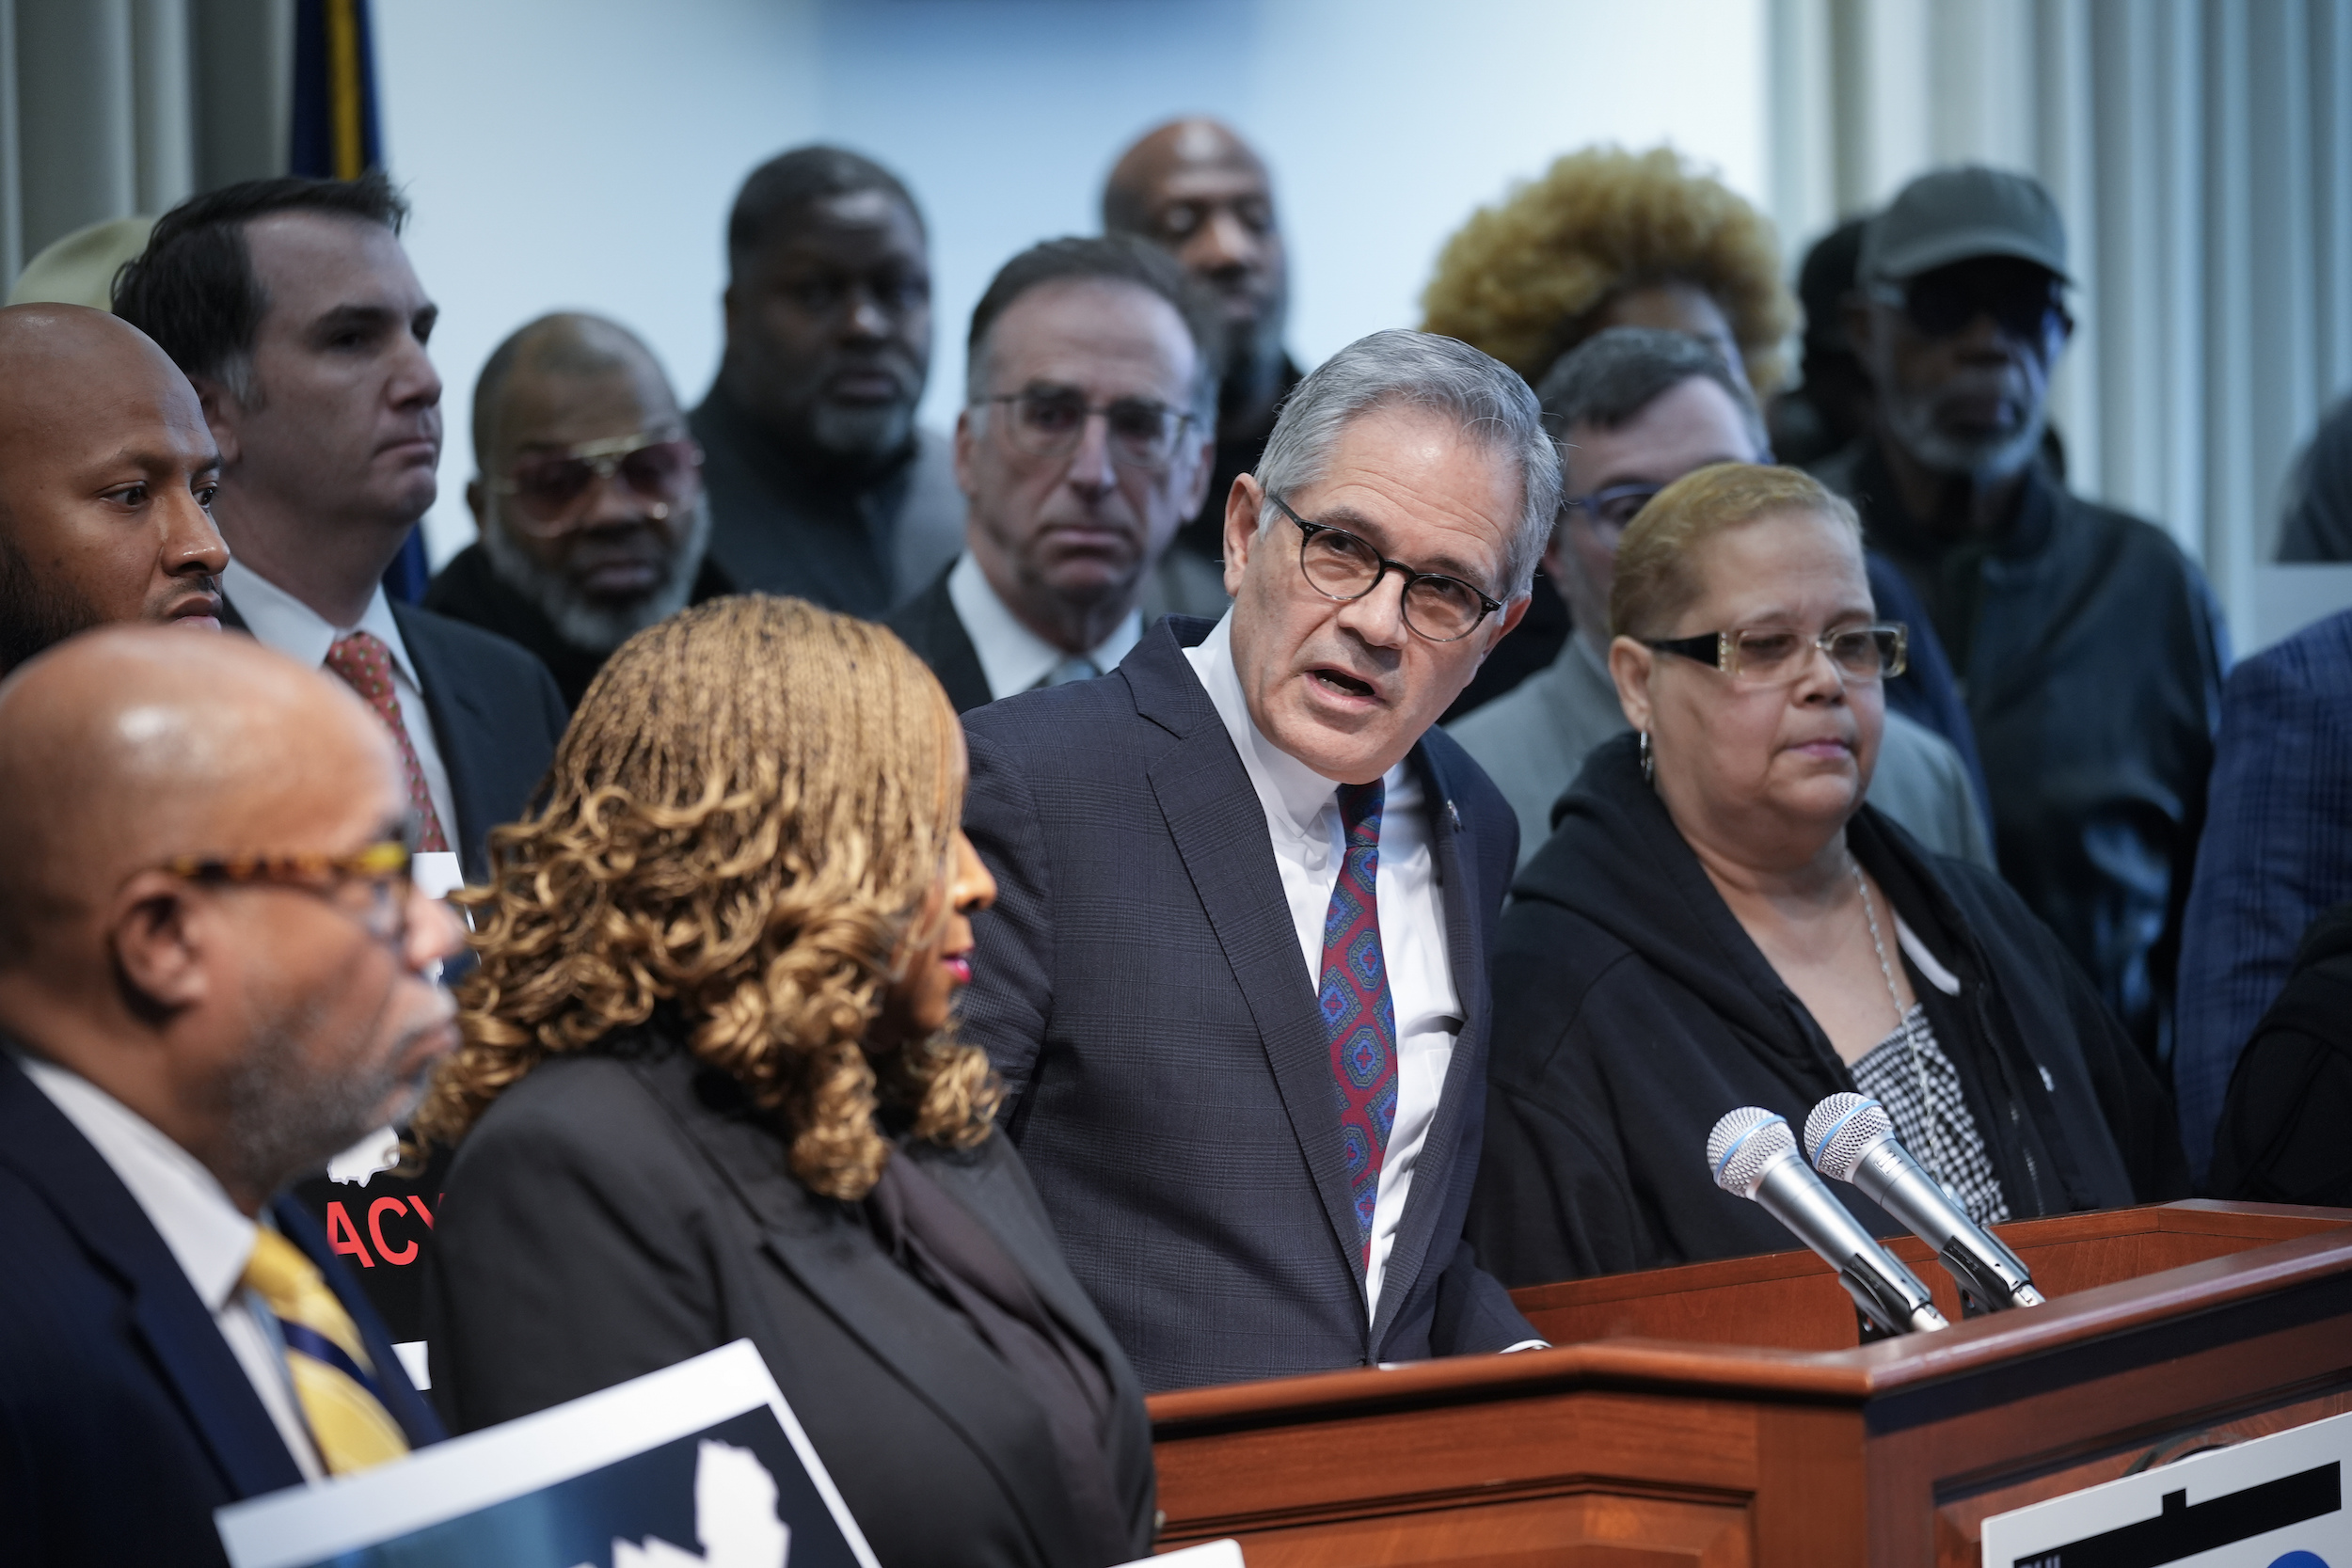 A few Philadelphia officials, including Larry Krasner, stand at a podium with two microphones.